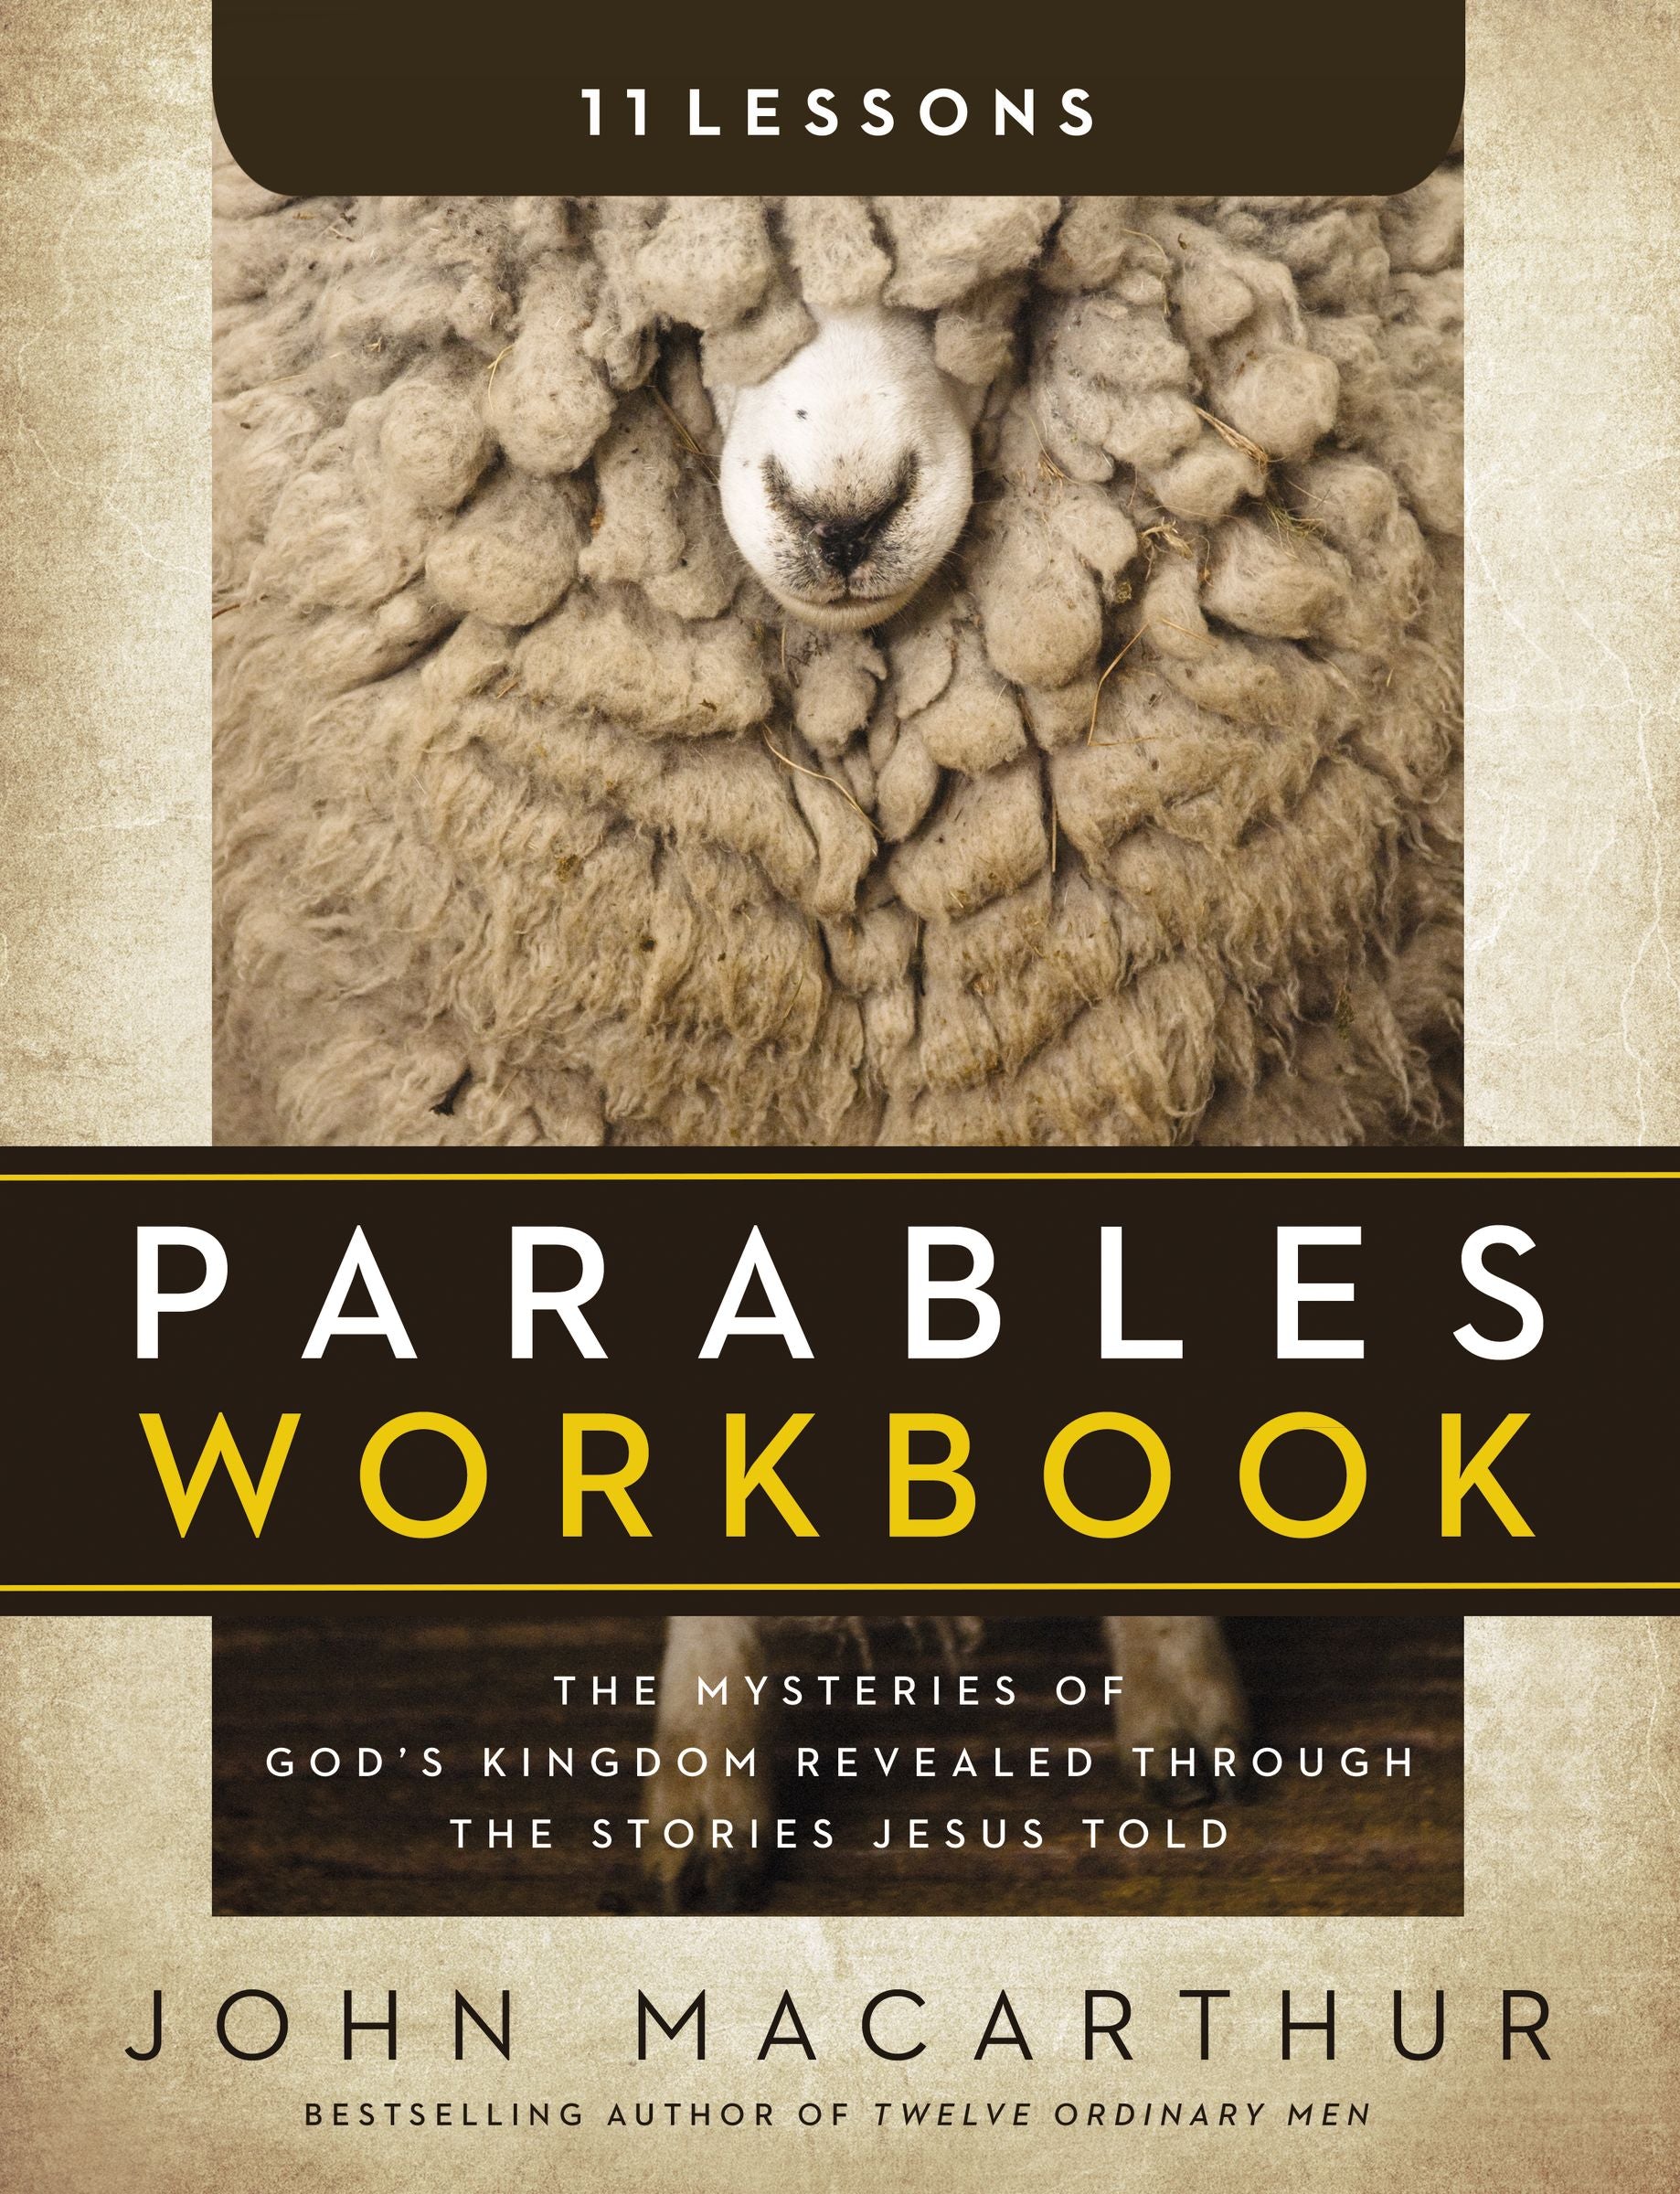 Image of Parables Workbook other